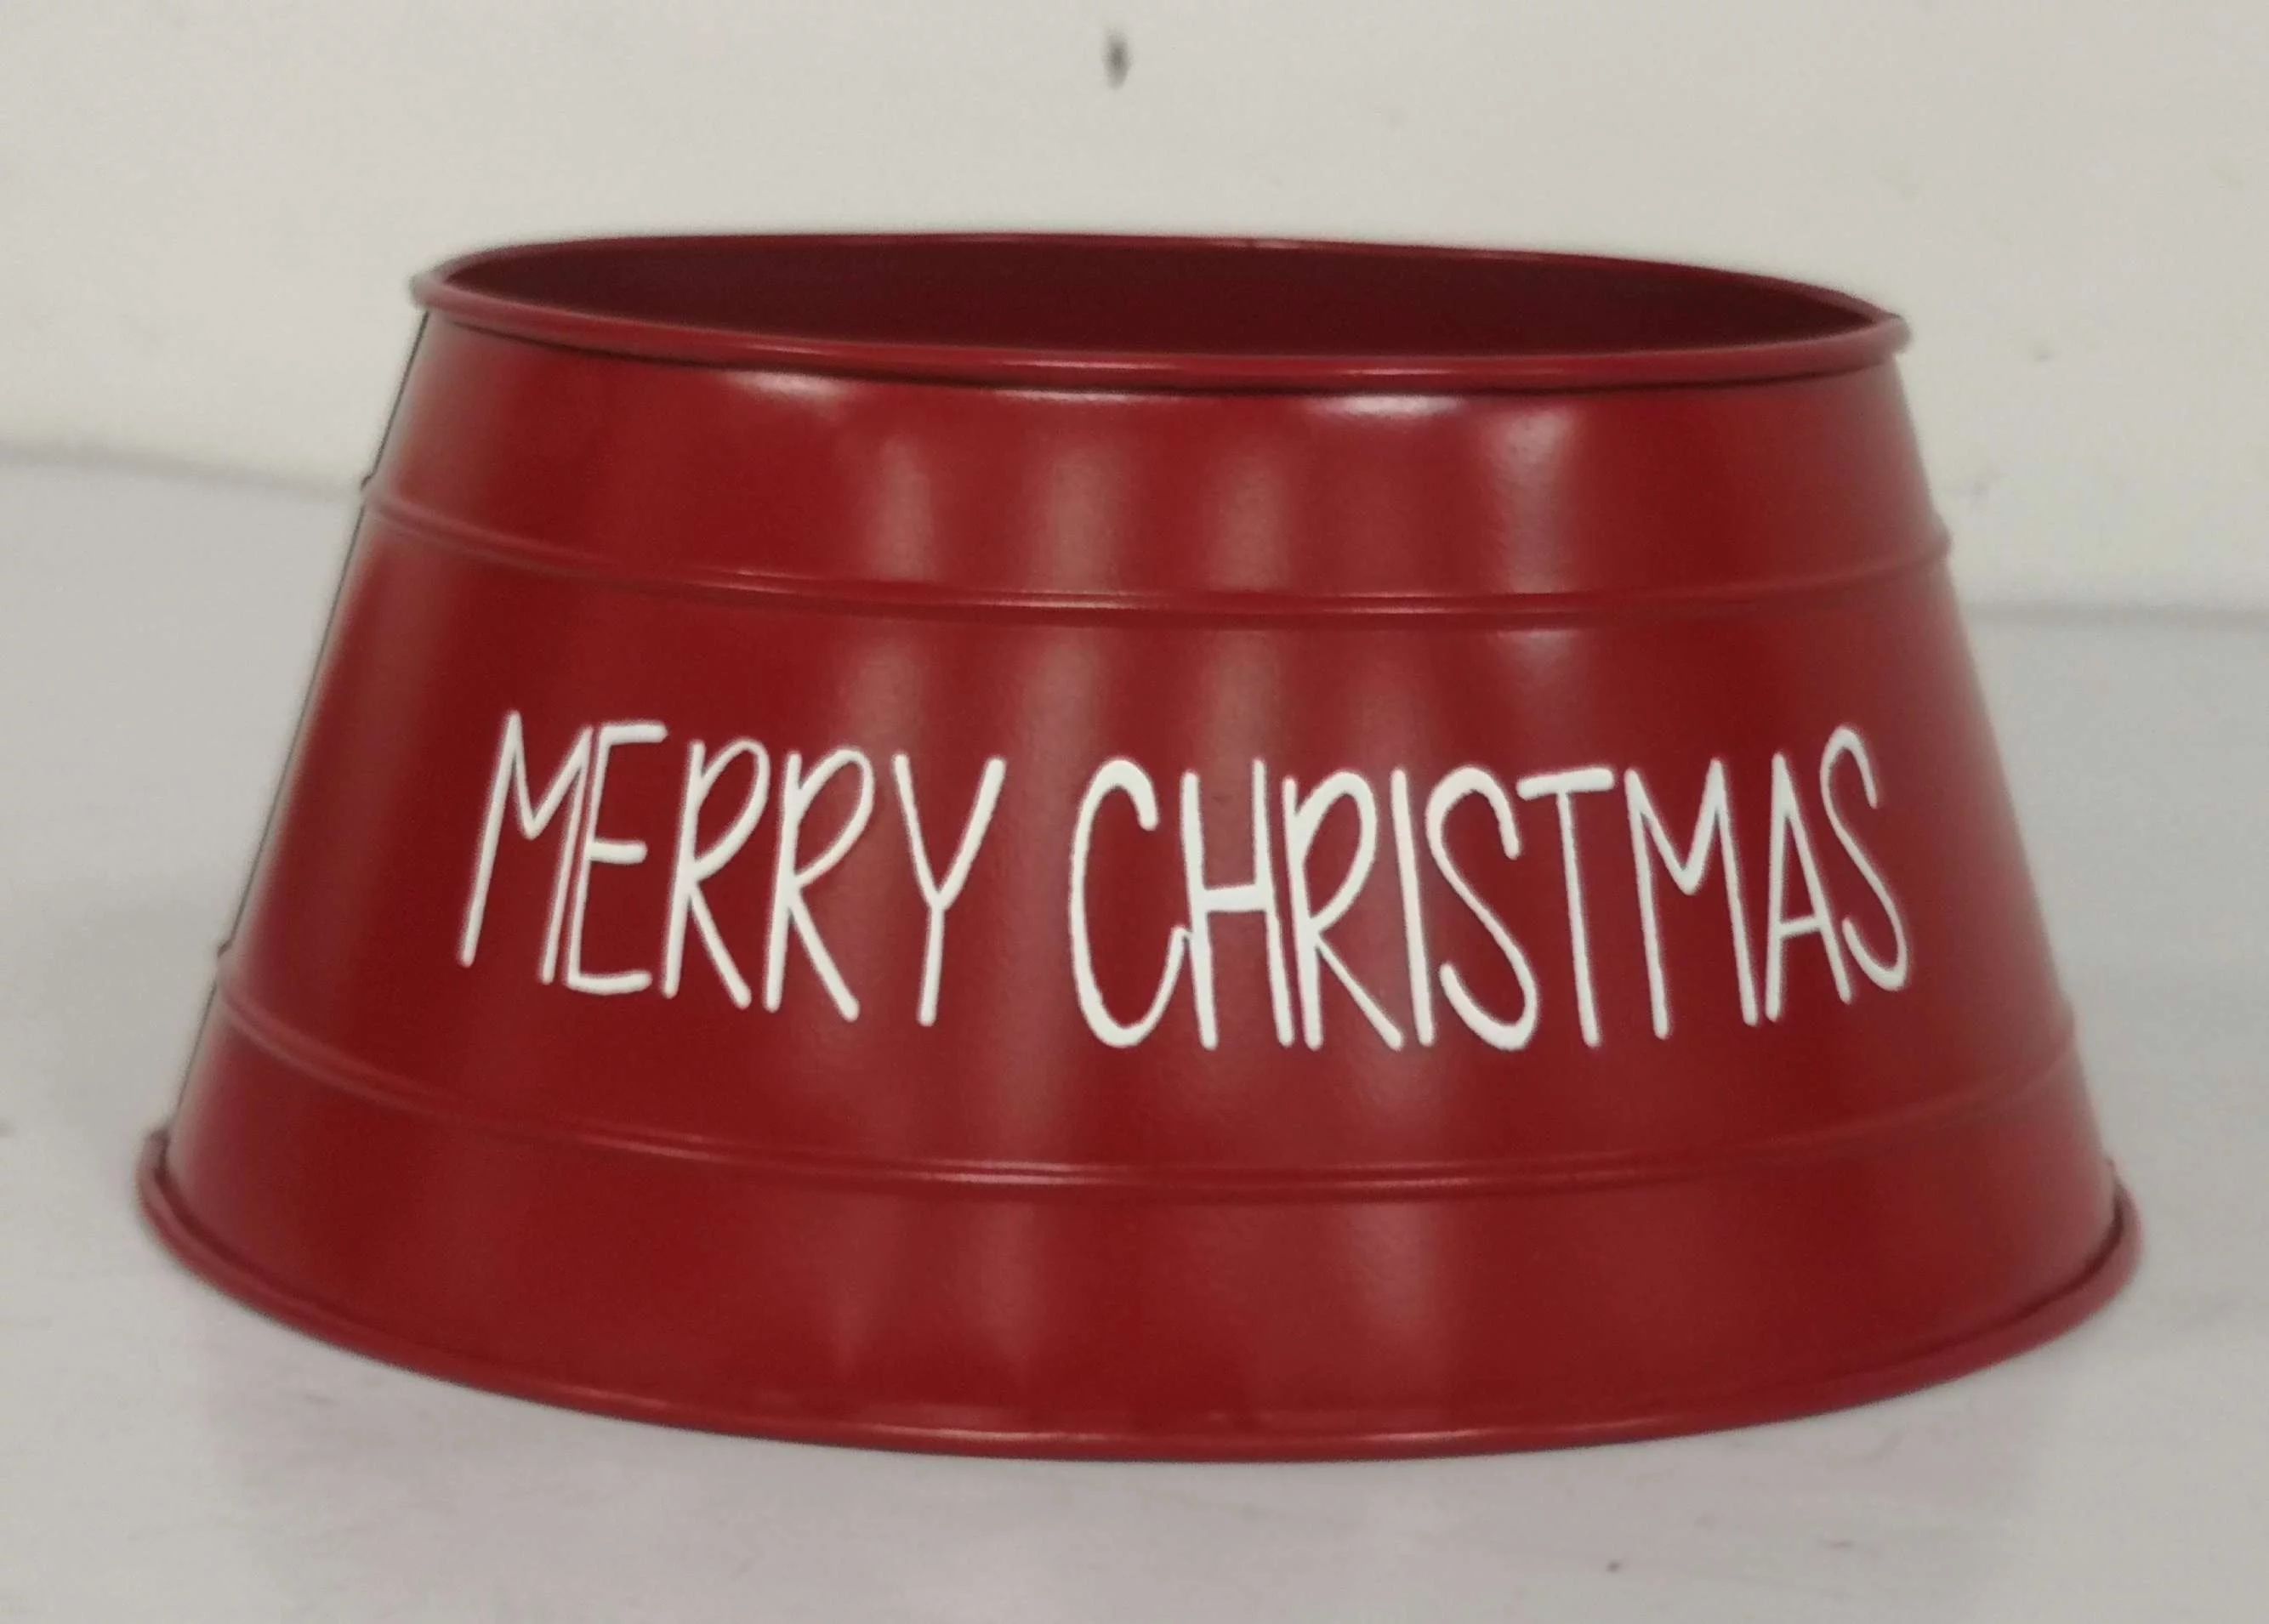 Merry Christmas Metal Red Tree Collar, 9-inch diameter, by Holiday Time | Walmart (US)